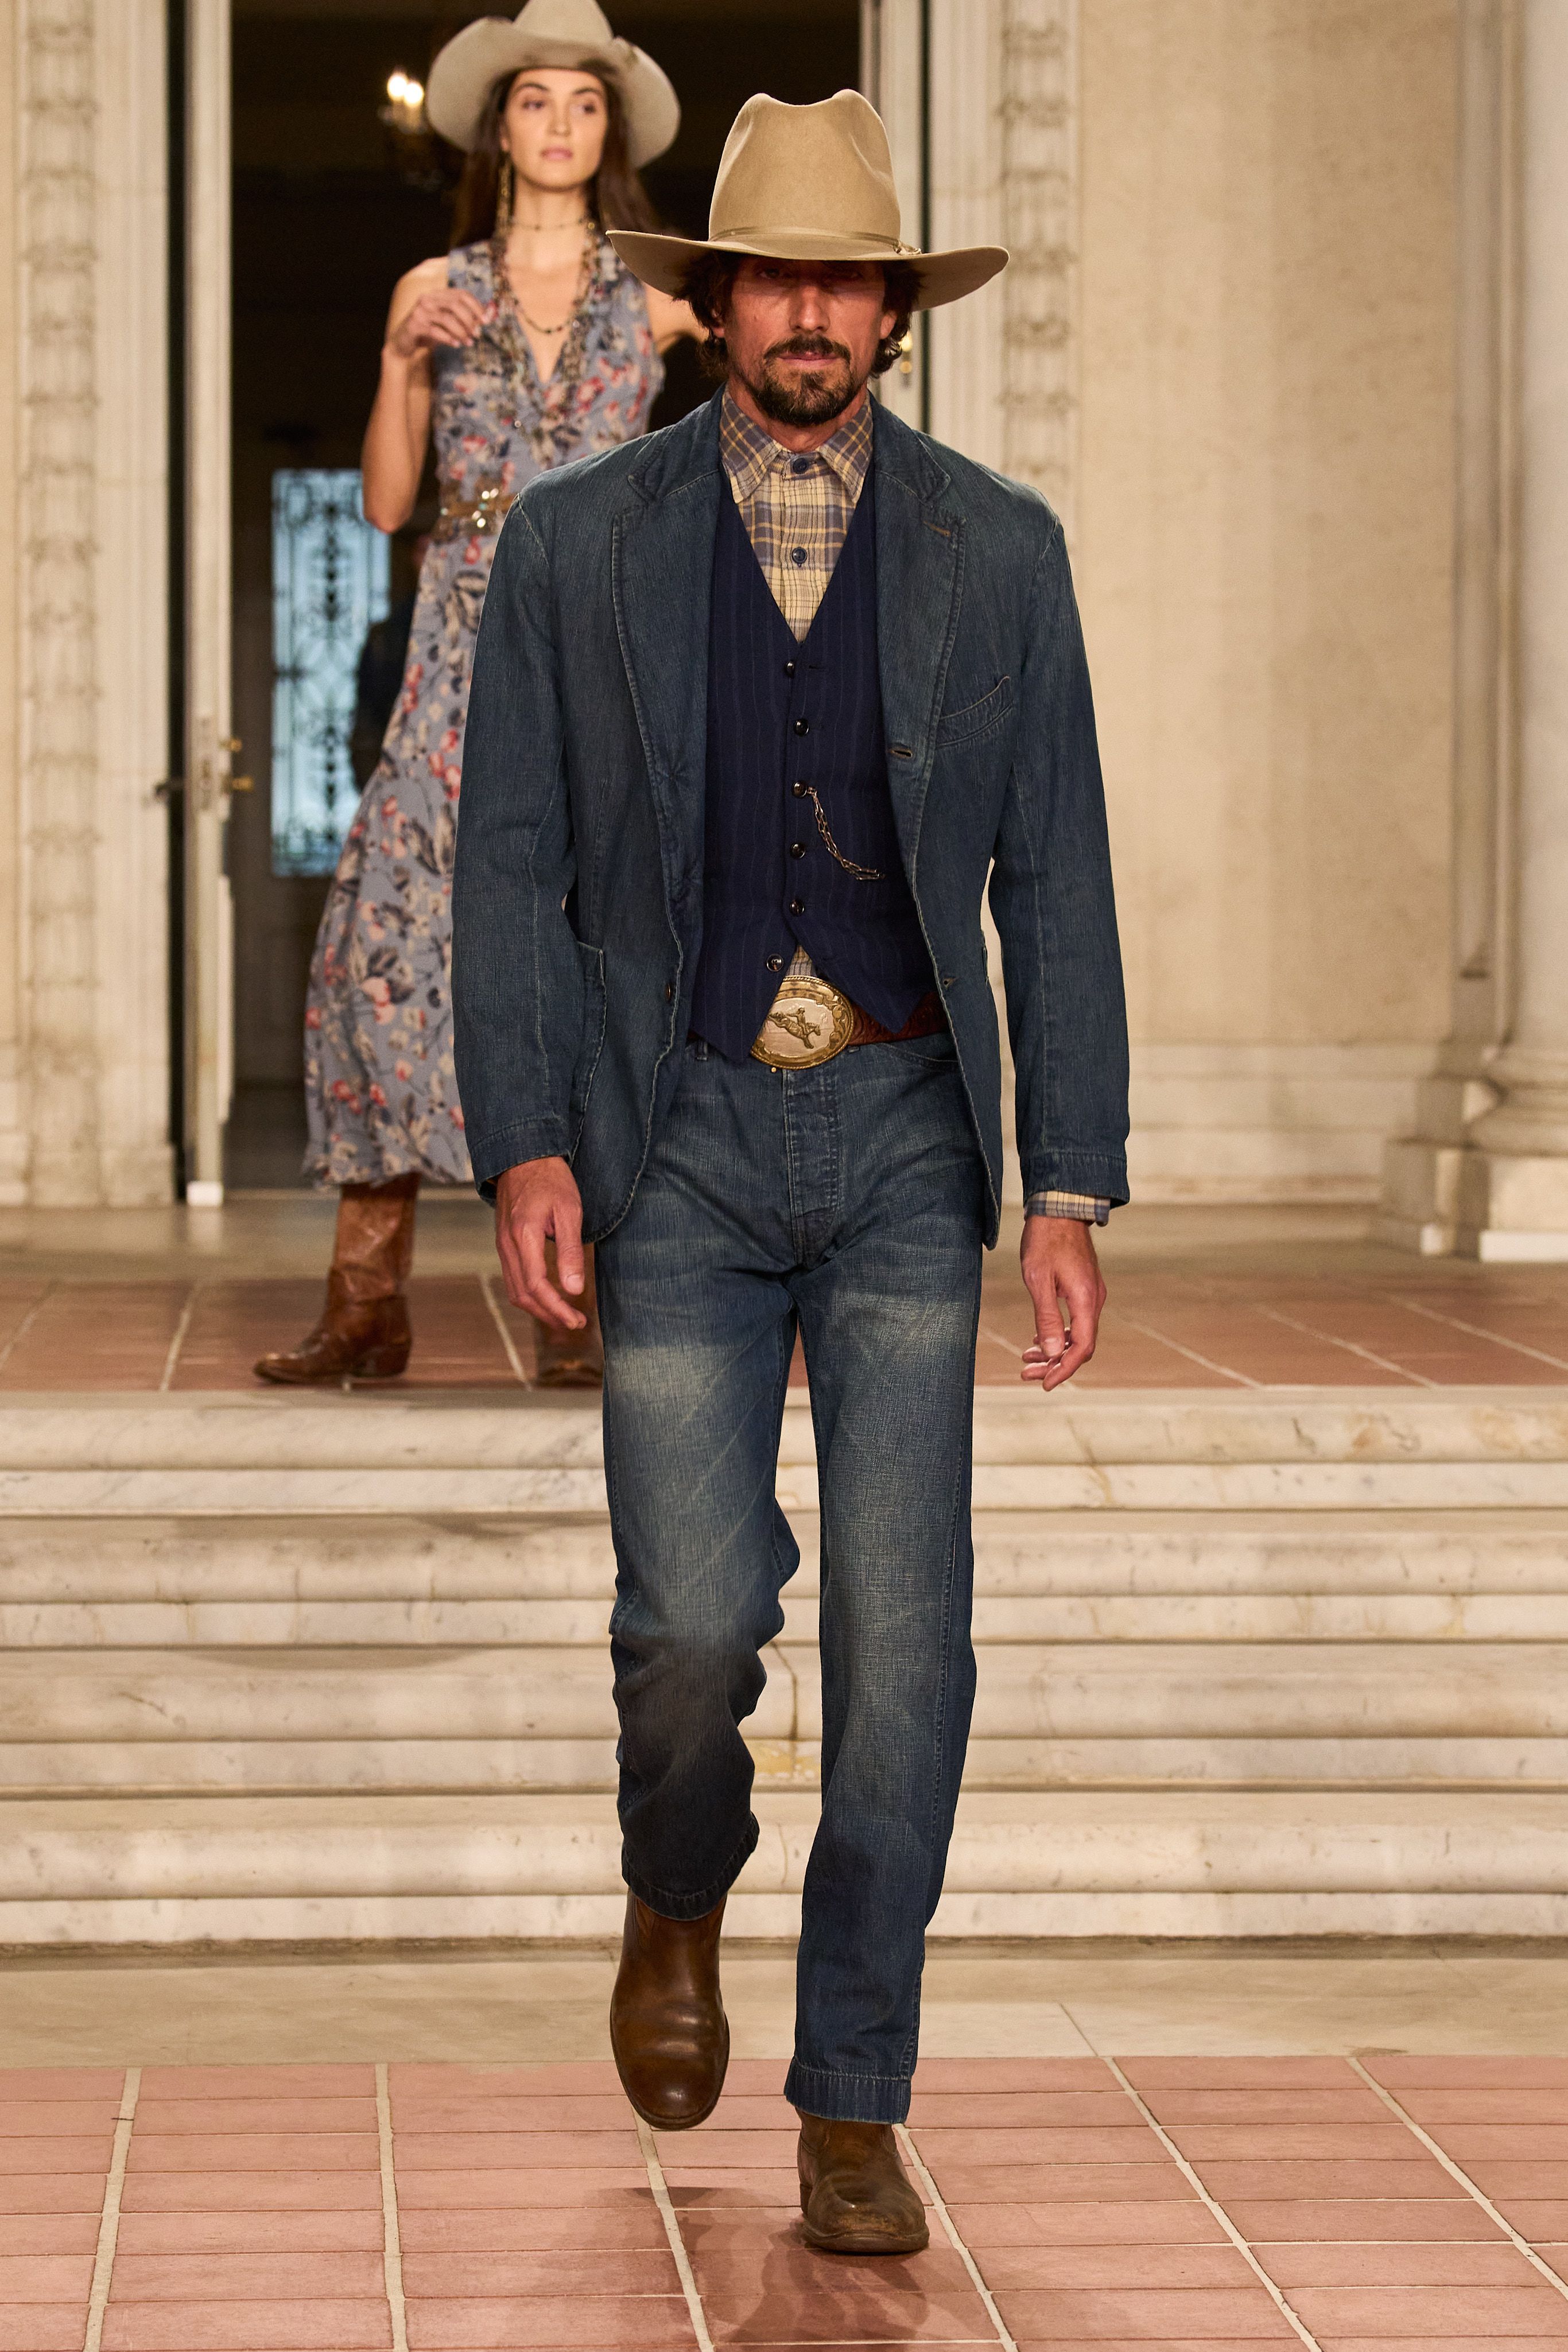 Ralph Lauren Show in L.A. Was a Family Affair With Remixed Classics – WWD